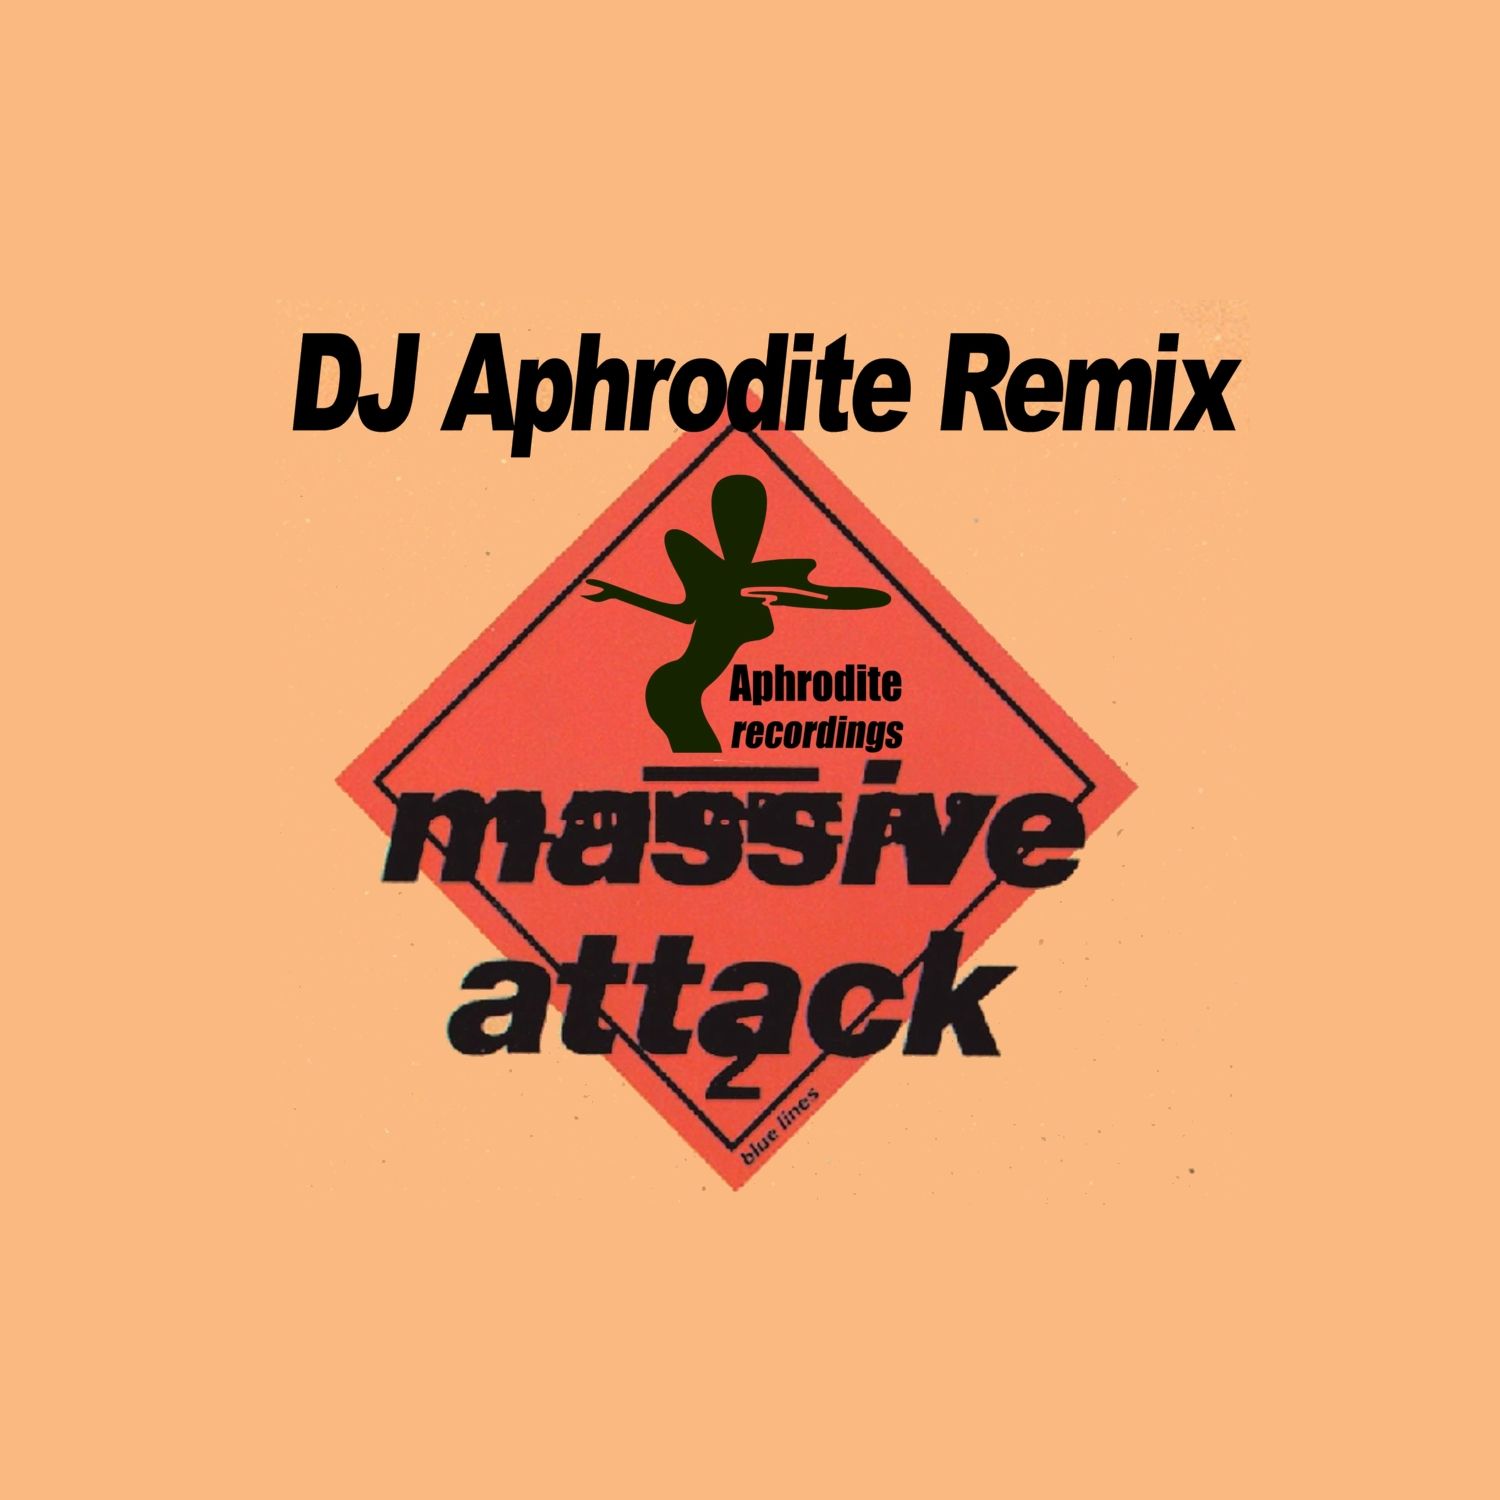 artworks 000130272912 x0bupa original - Radio Clash Podcast Aphrodite remixes Massive Attack Radio Clash Music Mashup Podcast brings you the best in eclectic tunes, mashups and remixes from around the world. Since 2004, we've been bringing you the freshest and most innovative music from a diverse range of genres and cultures. Join us on our musical journey as we explore the sounds of yesterday, today, and tomorrow. Discover new music and be inspired by the mashup of musical styles that only Radio Clash can provide. Subscribe now to elevate your musical experience!